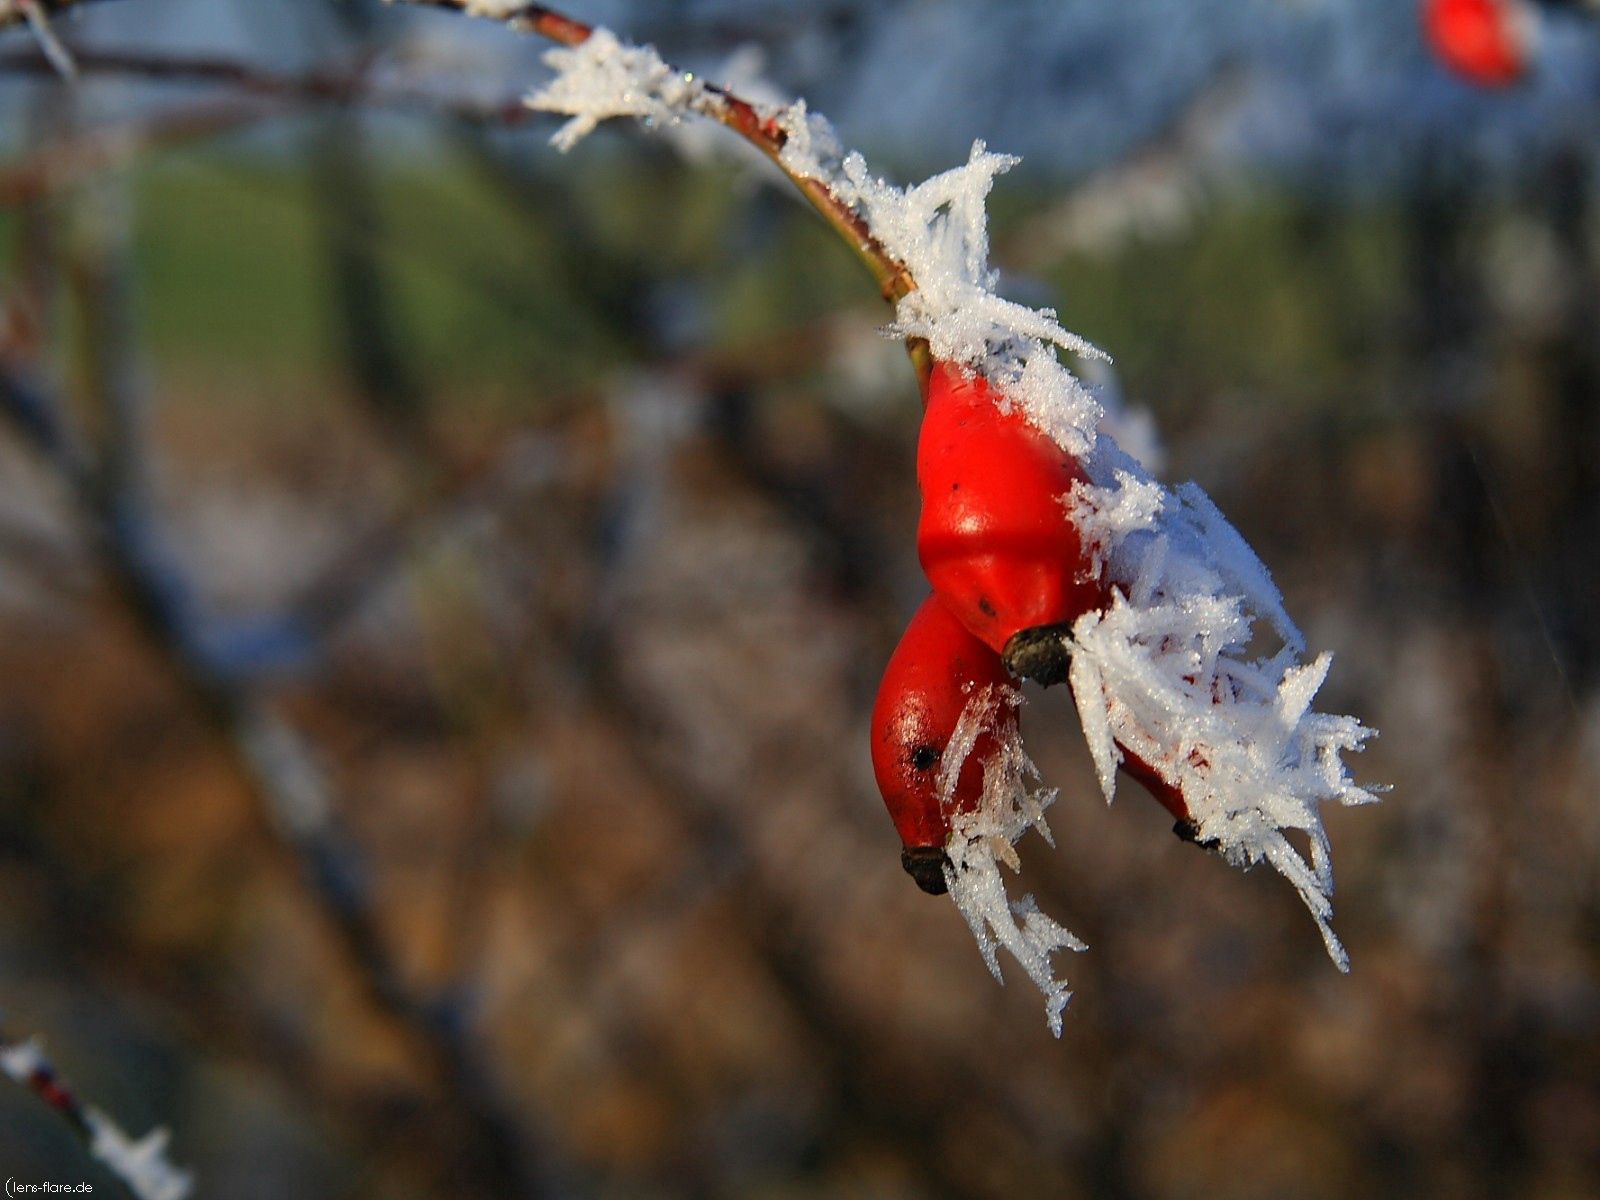 nature, berries, briar, branch, frost, hoarfrost, fruit